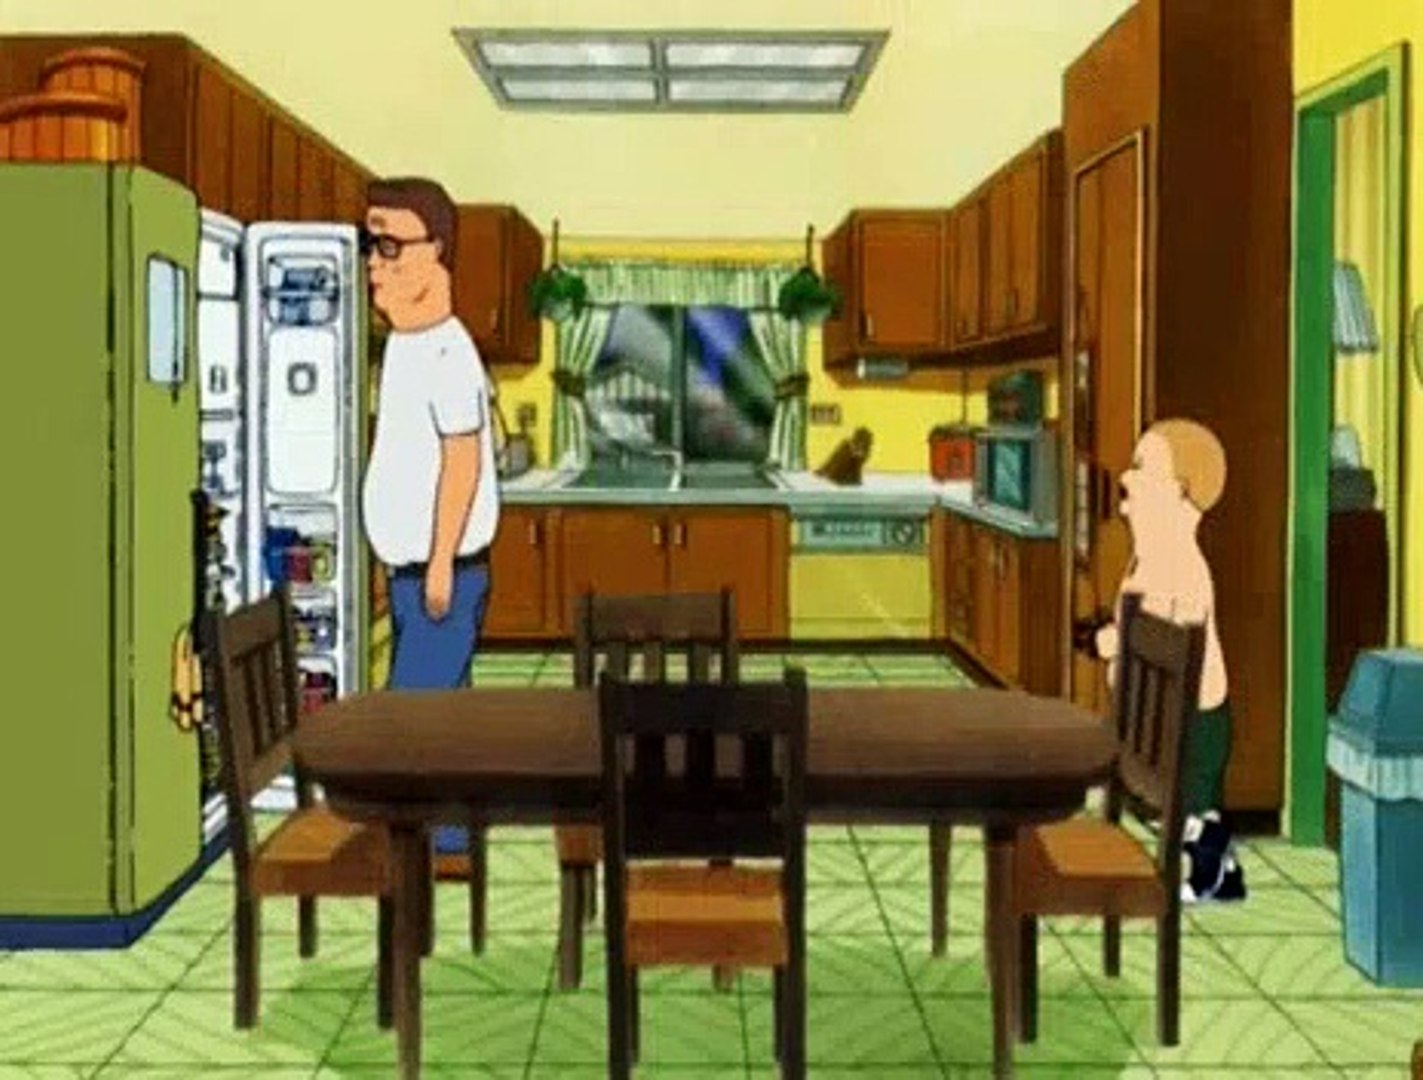 Watch King of the Hill season 6 episode 1 streaming online